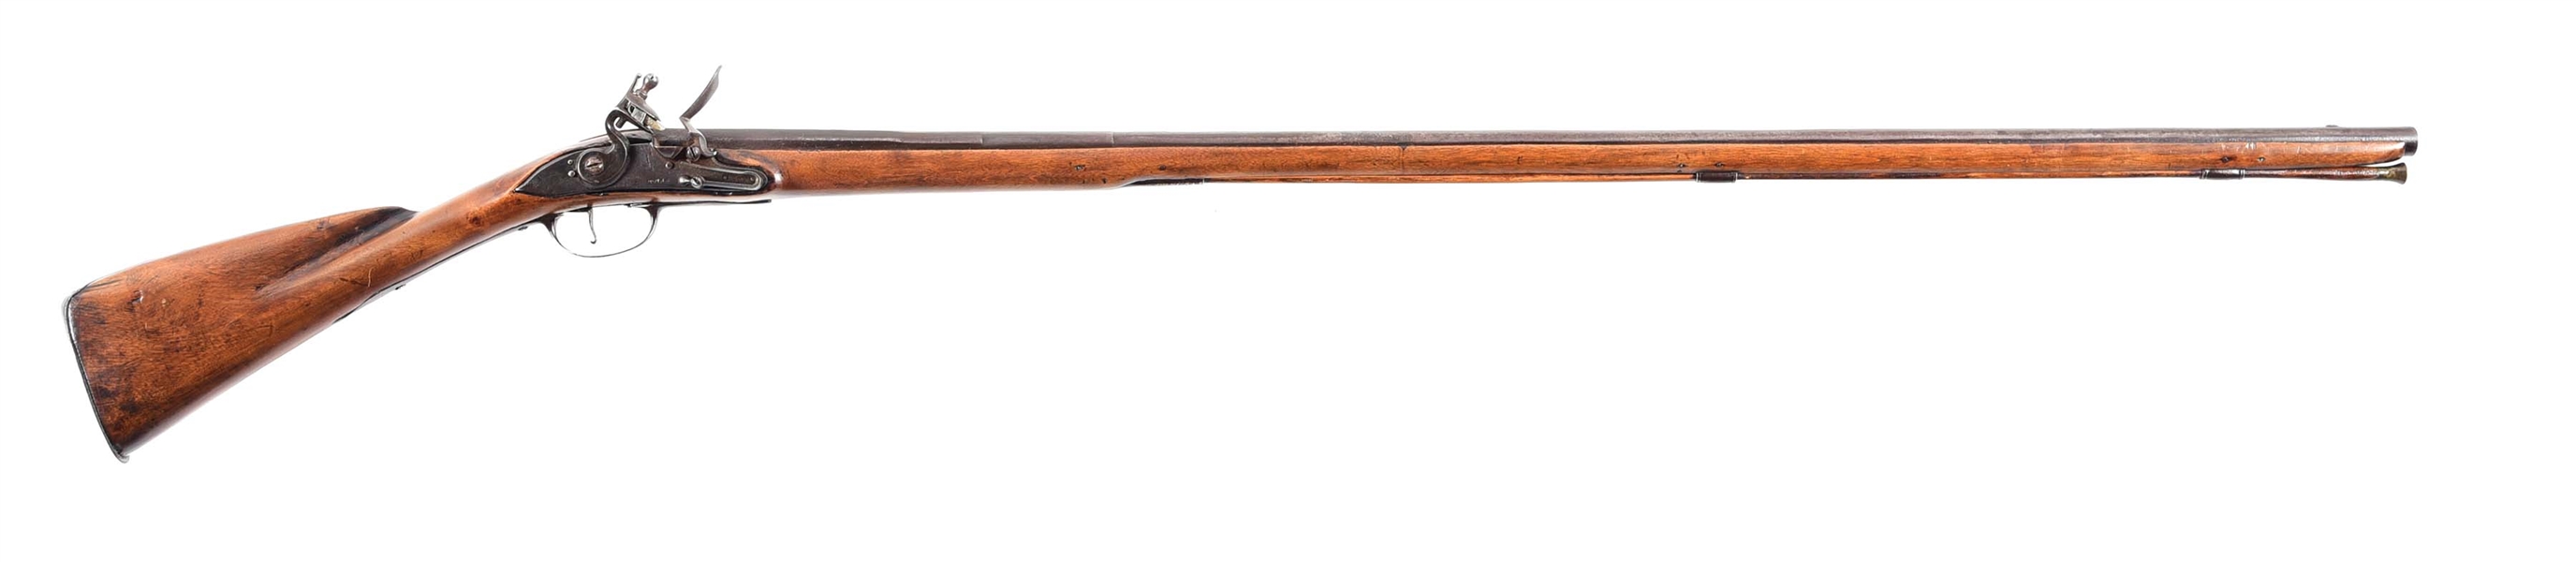 (A) EARLY FRENCH "FUSIL DE CHASSE" OR TRADE GUN.